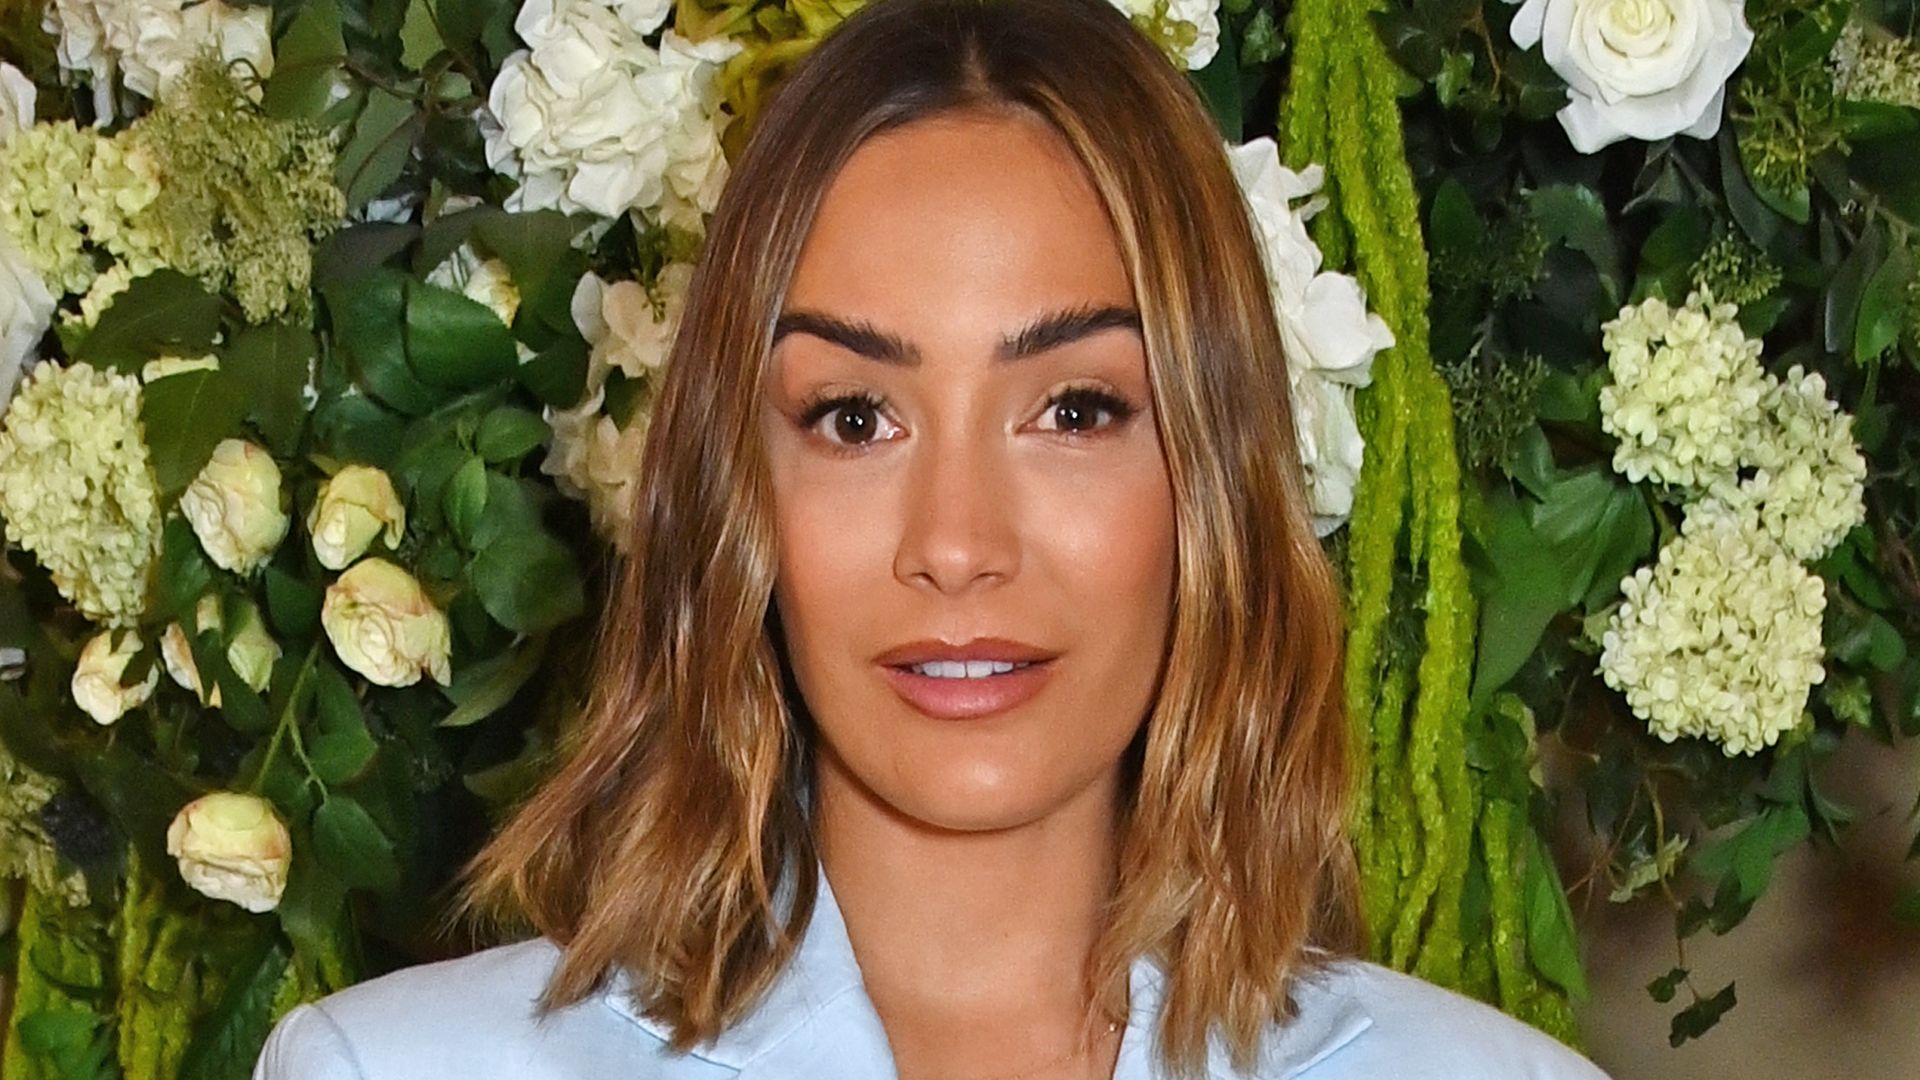 Frankie Bridge in a blue suit standing in front of white flowers